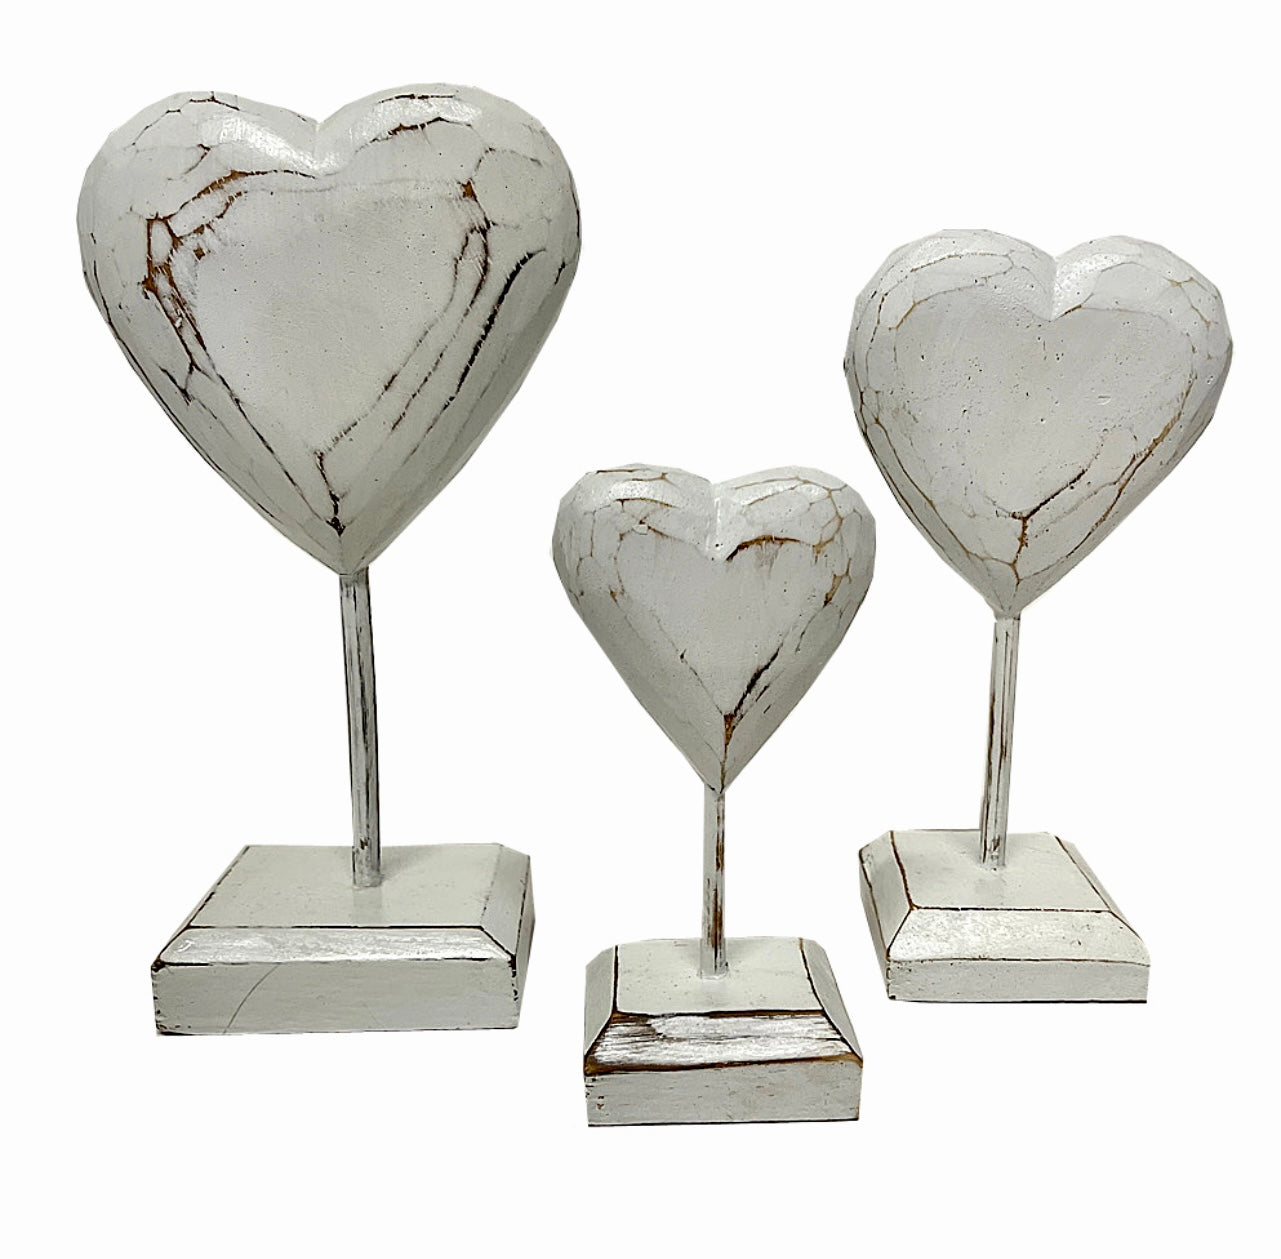 Set of 3 White Wash Wooden Hearts On Stands 22cm, 18cm, 12cm